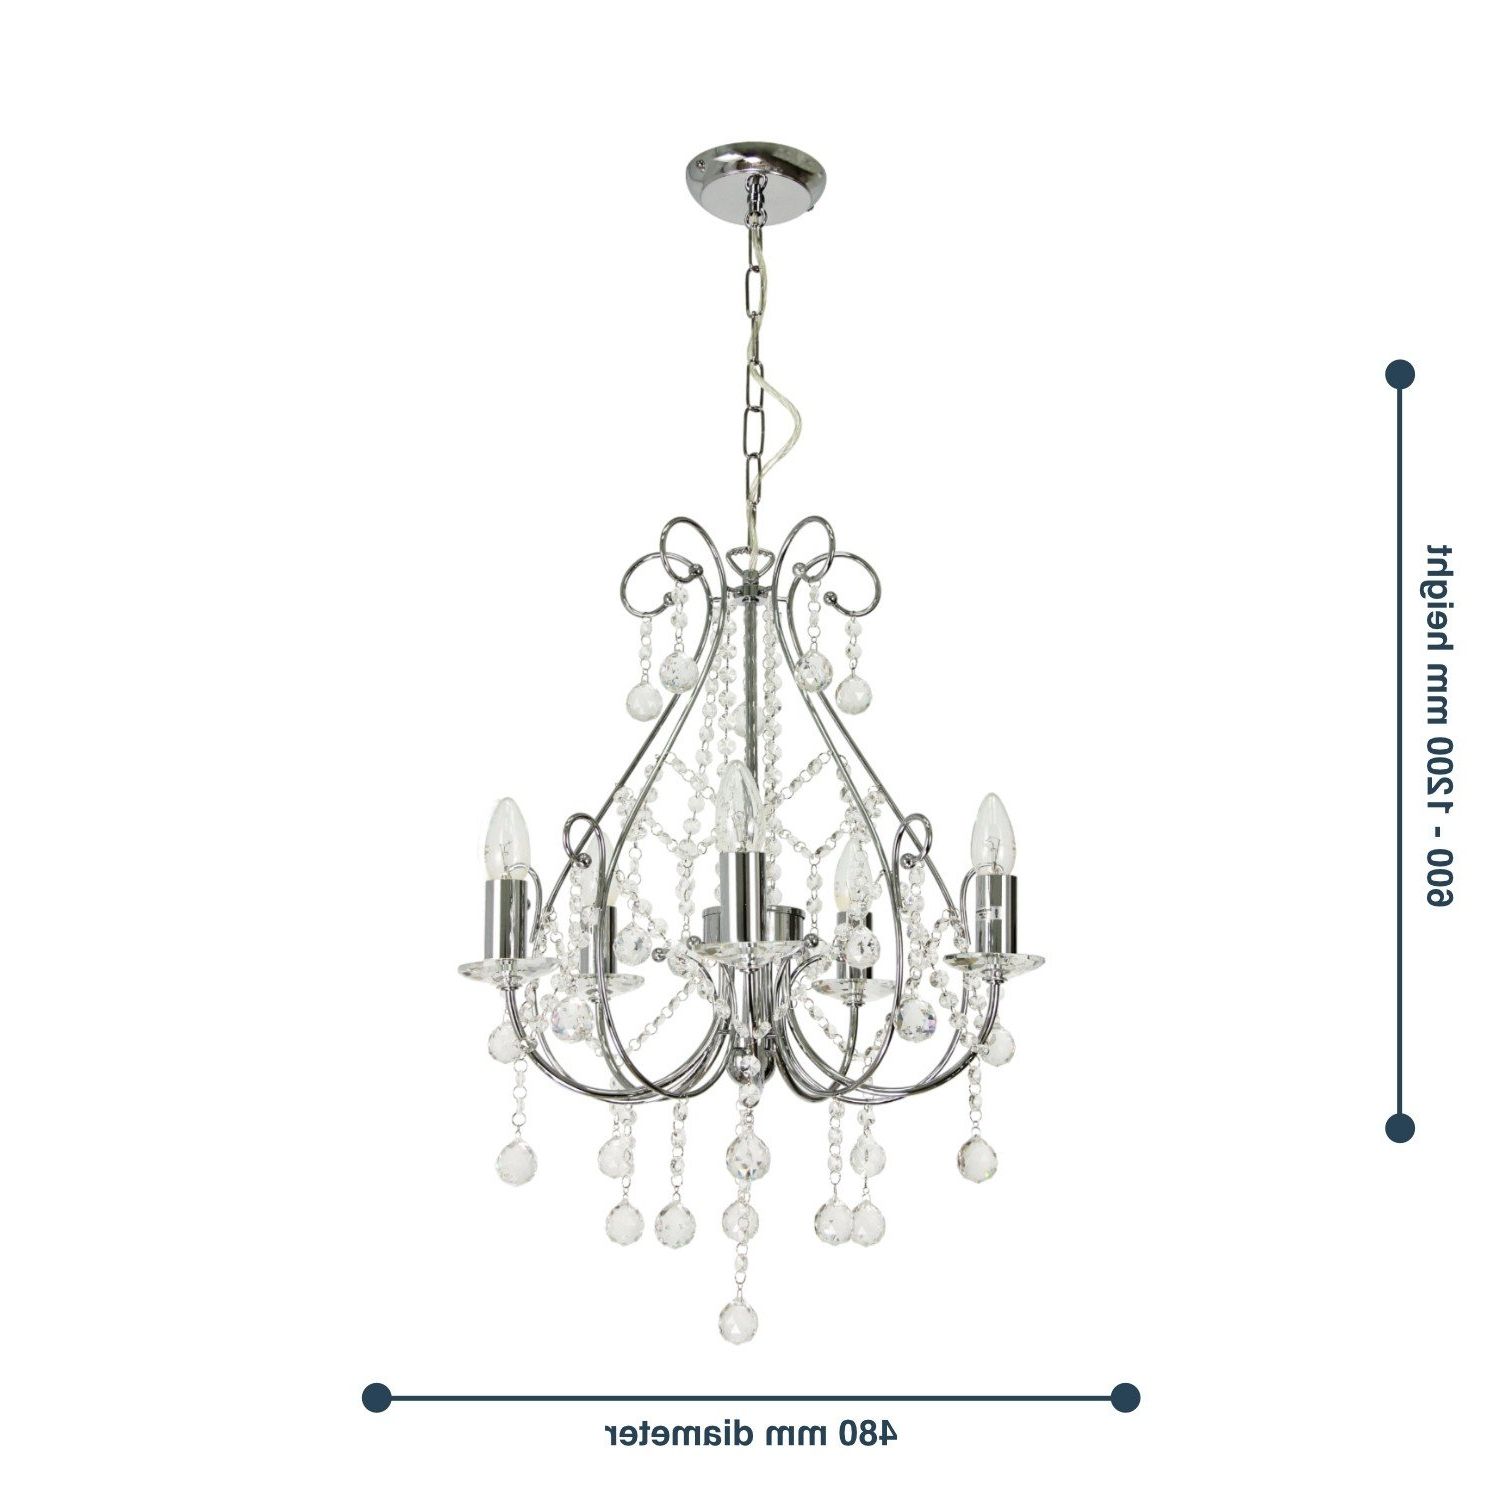 Pair Of Crystal Chandeliers In Polished Chrome Within 2019 Chrome And Crystal Led Chandeliers (View 15 of 15)